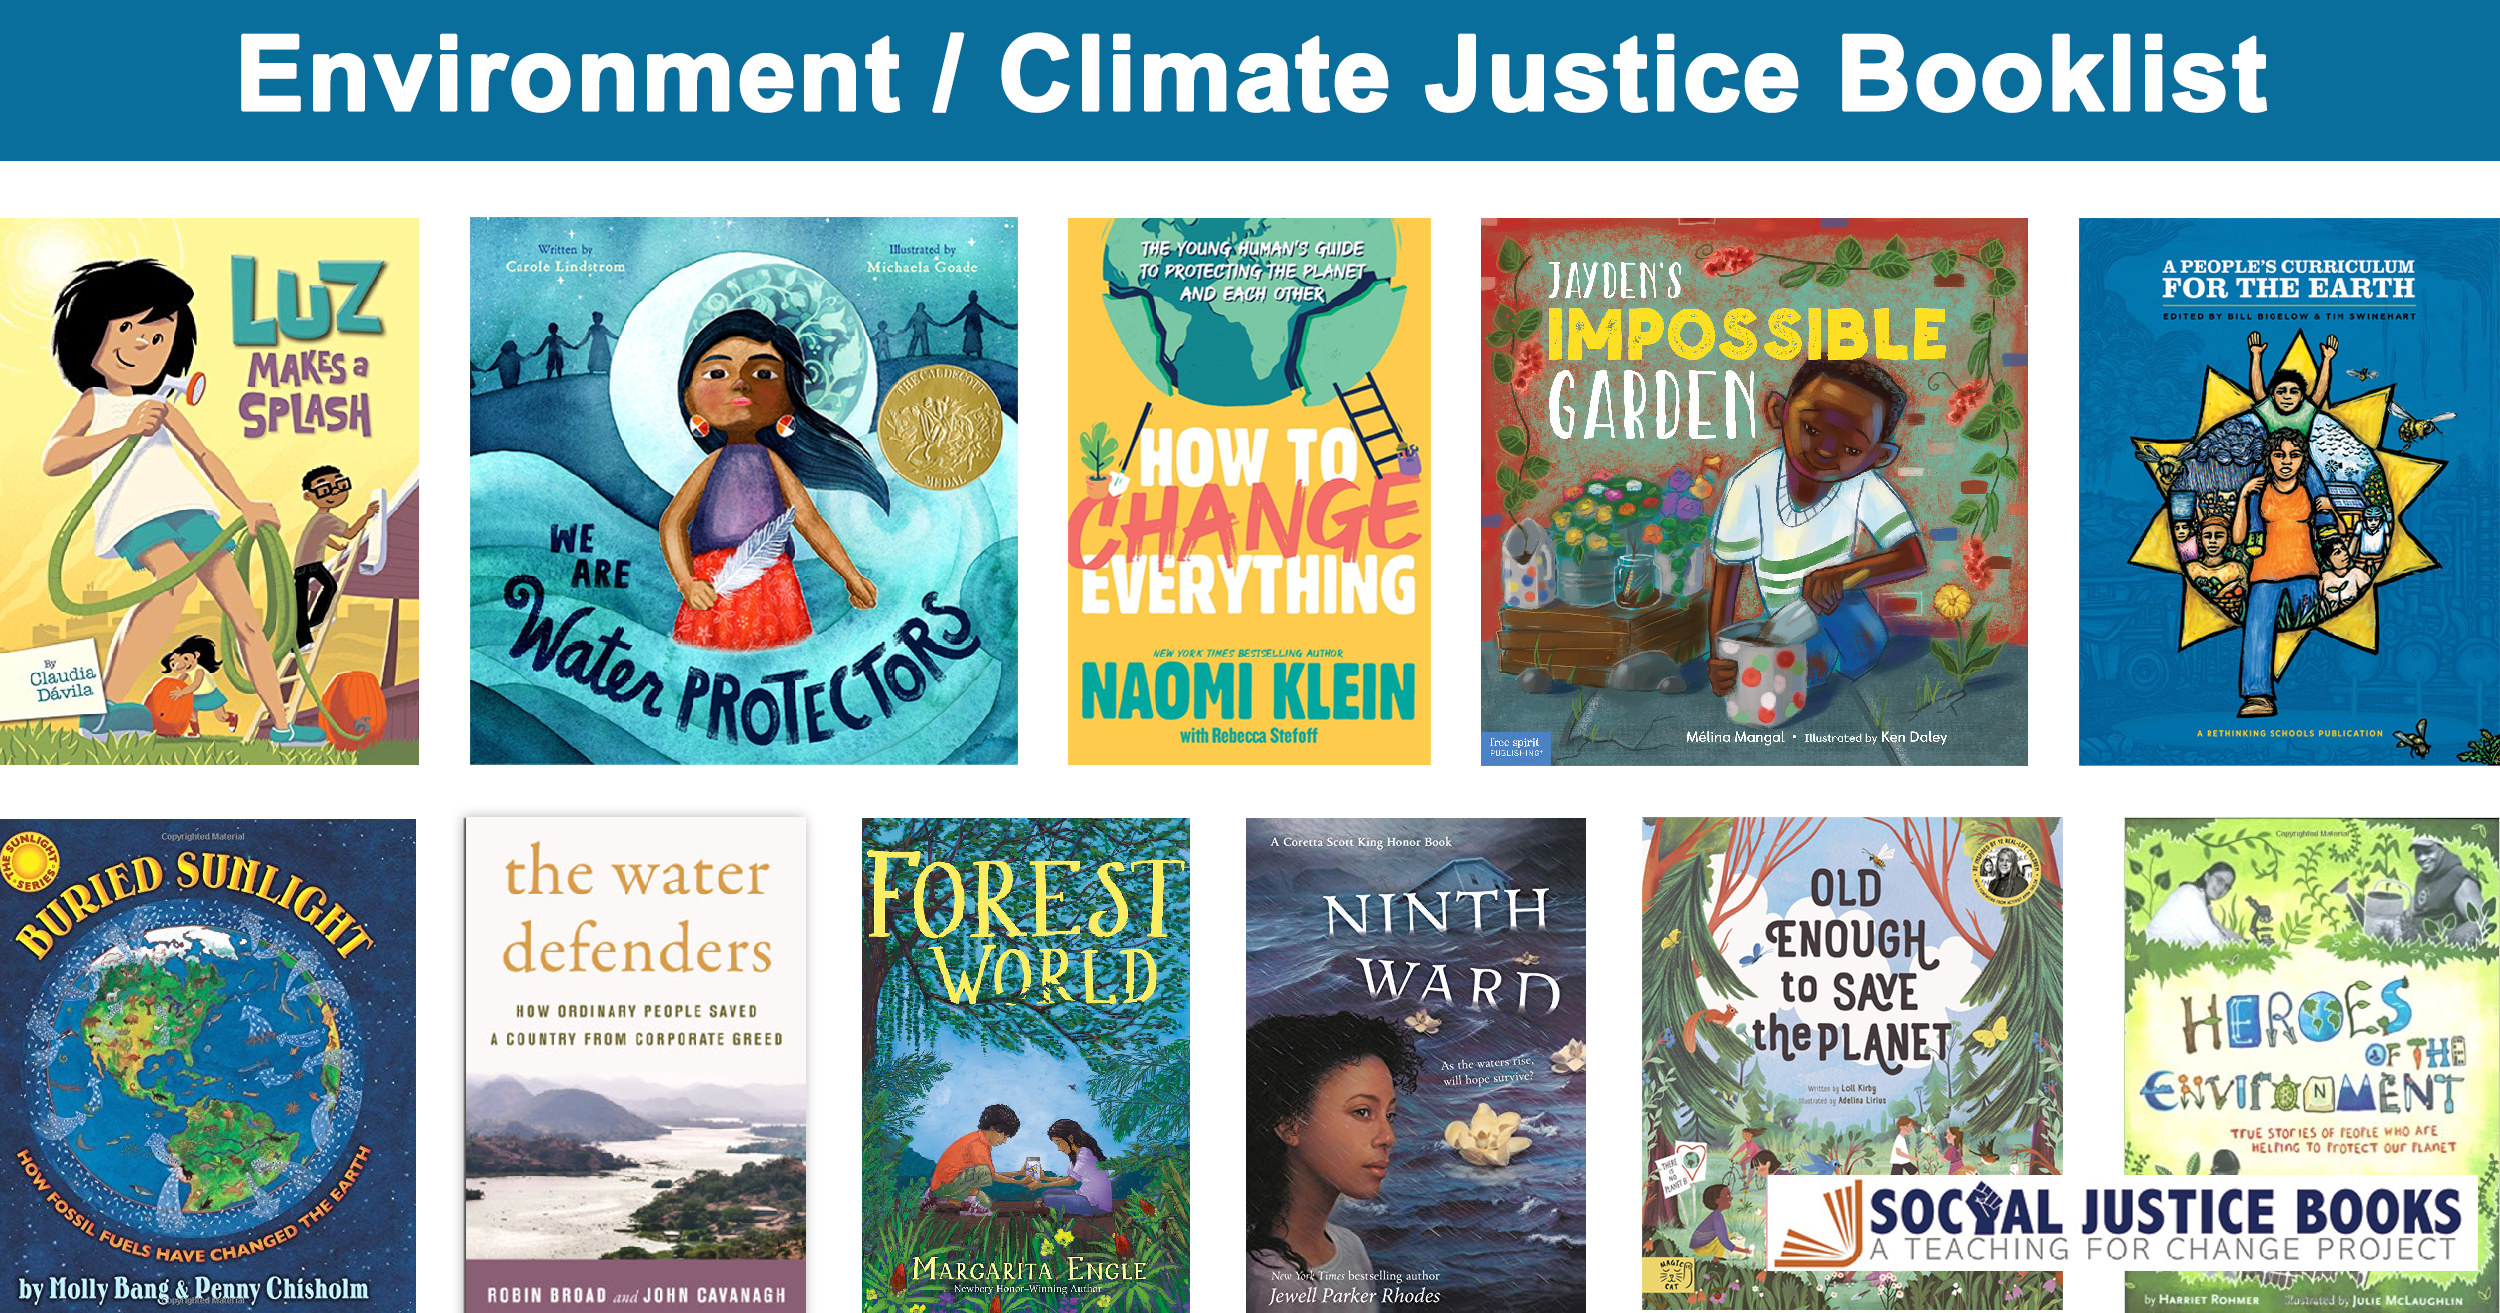 Environment / Climate Justice - Social Justice Books